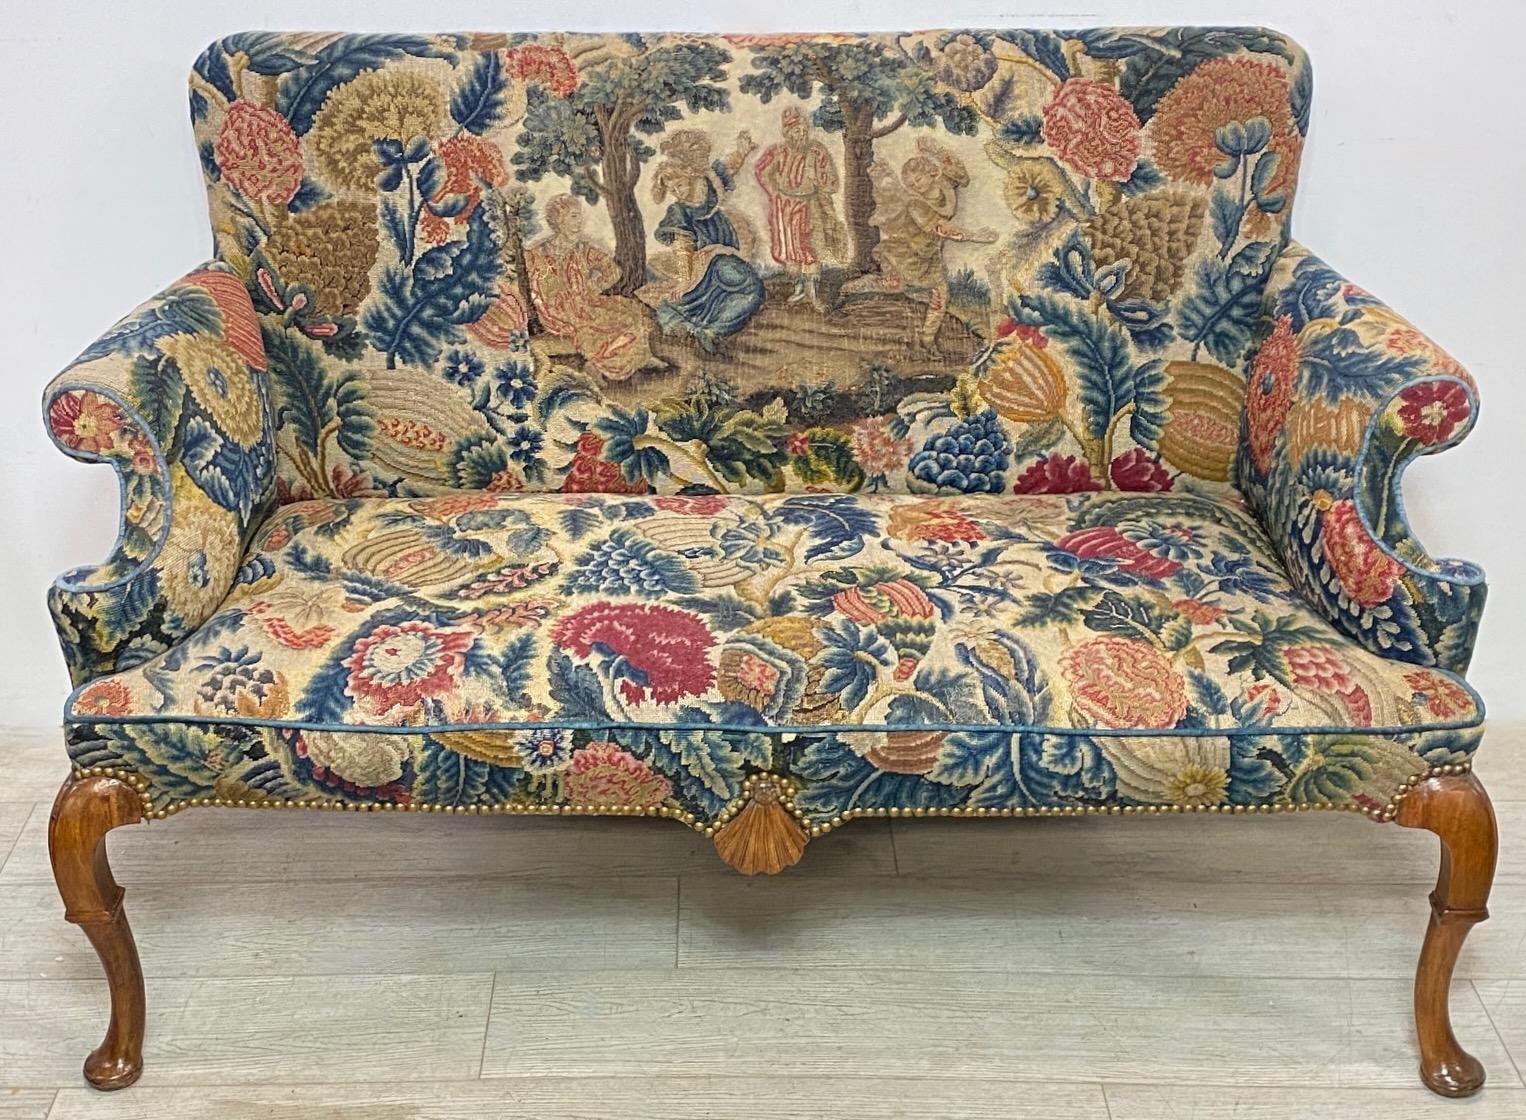 Upholstery Queen Anne Style Mahogany and Needlepoint Settee, England 18th Century